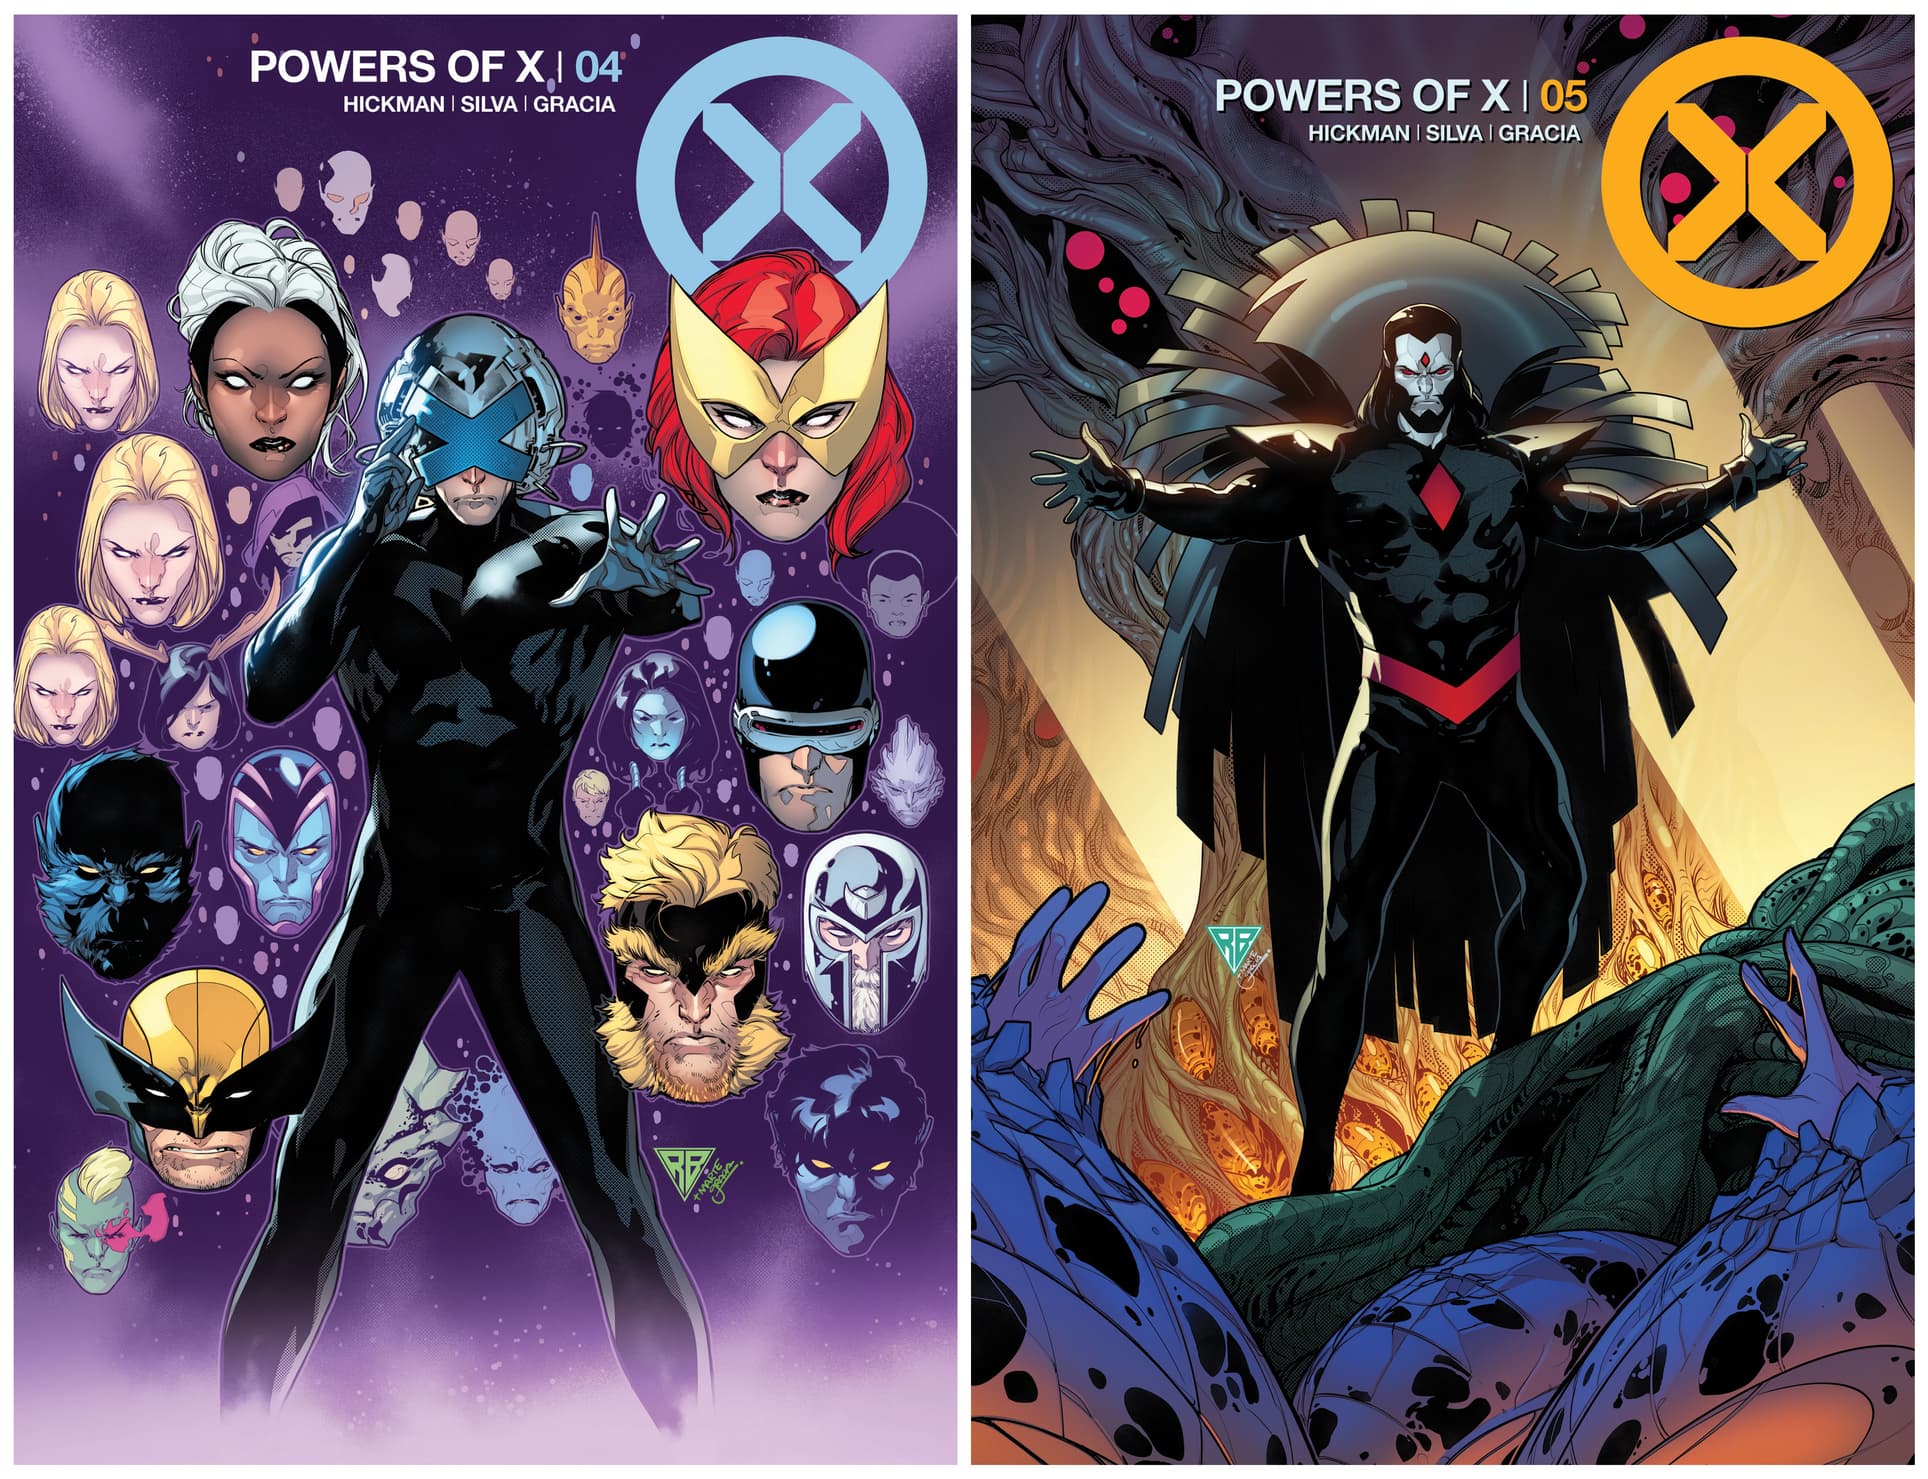 POWERS OF X #4 AND #5